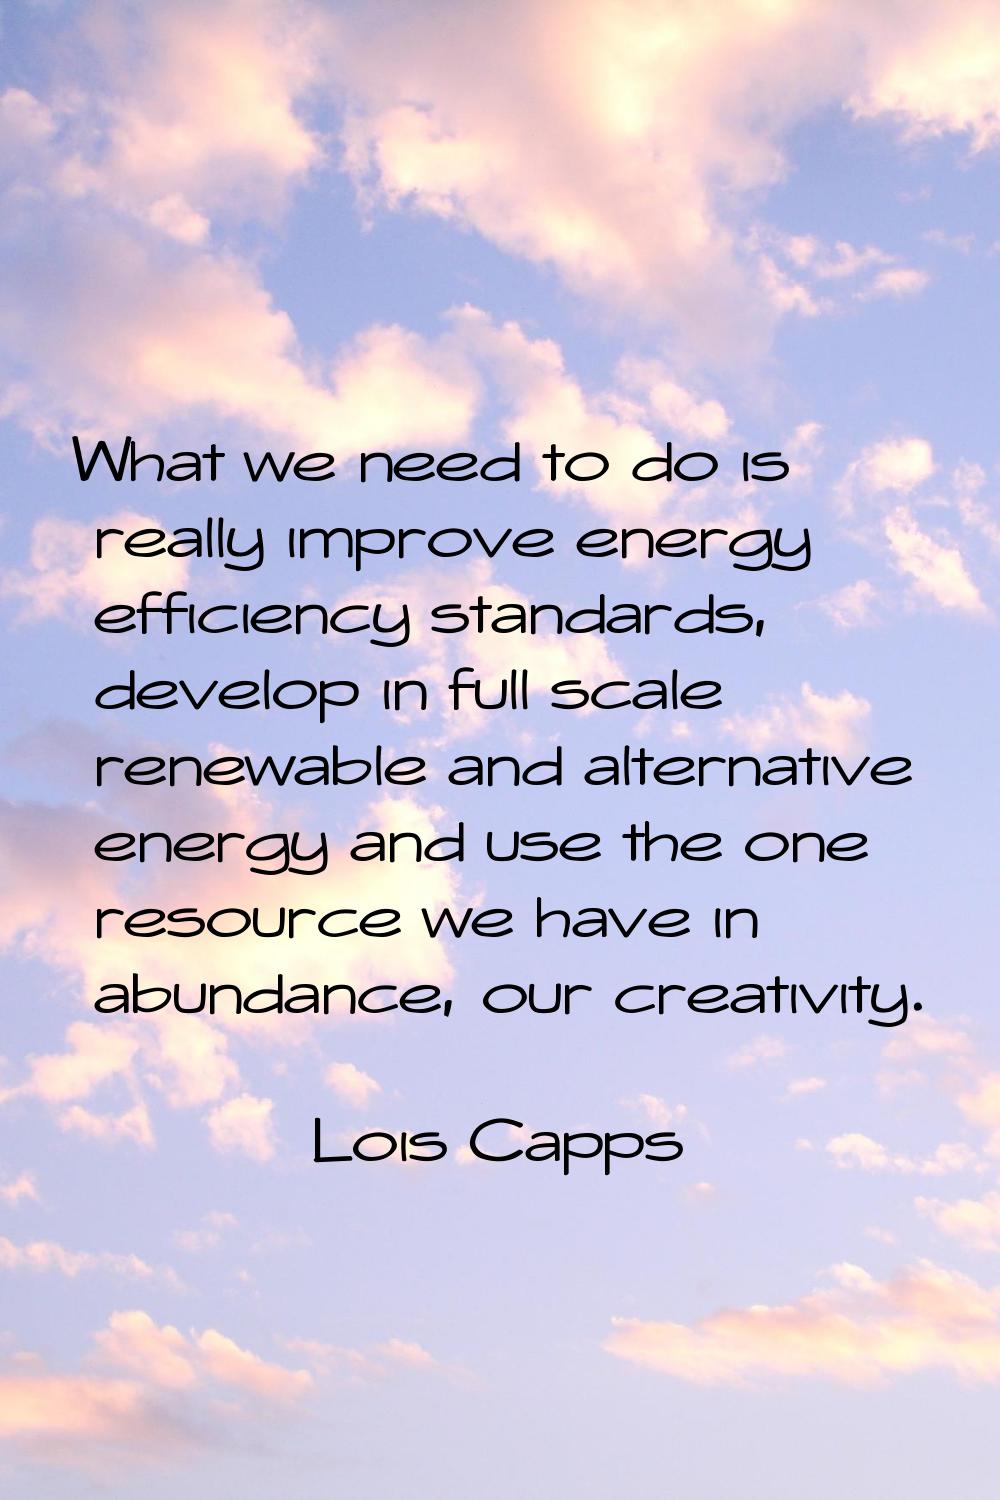 What we need to do is really improve energy efficiency standards, develop in full scale renewable a